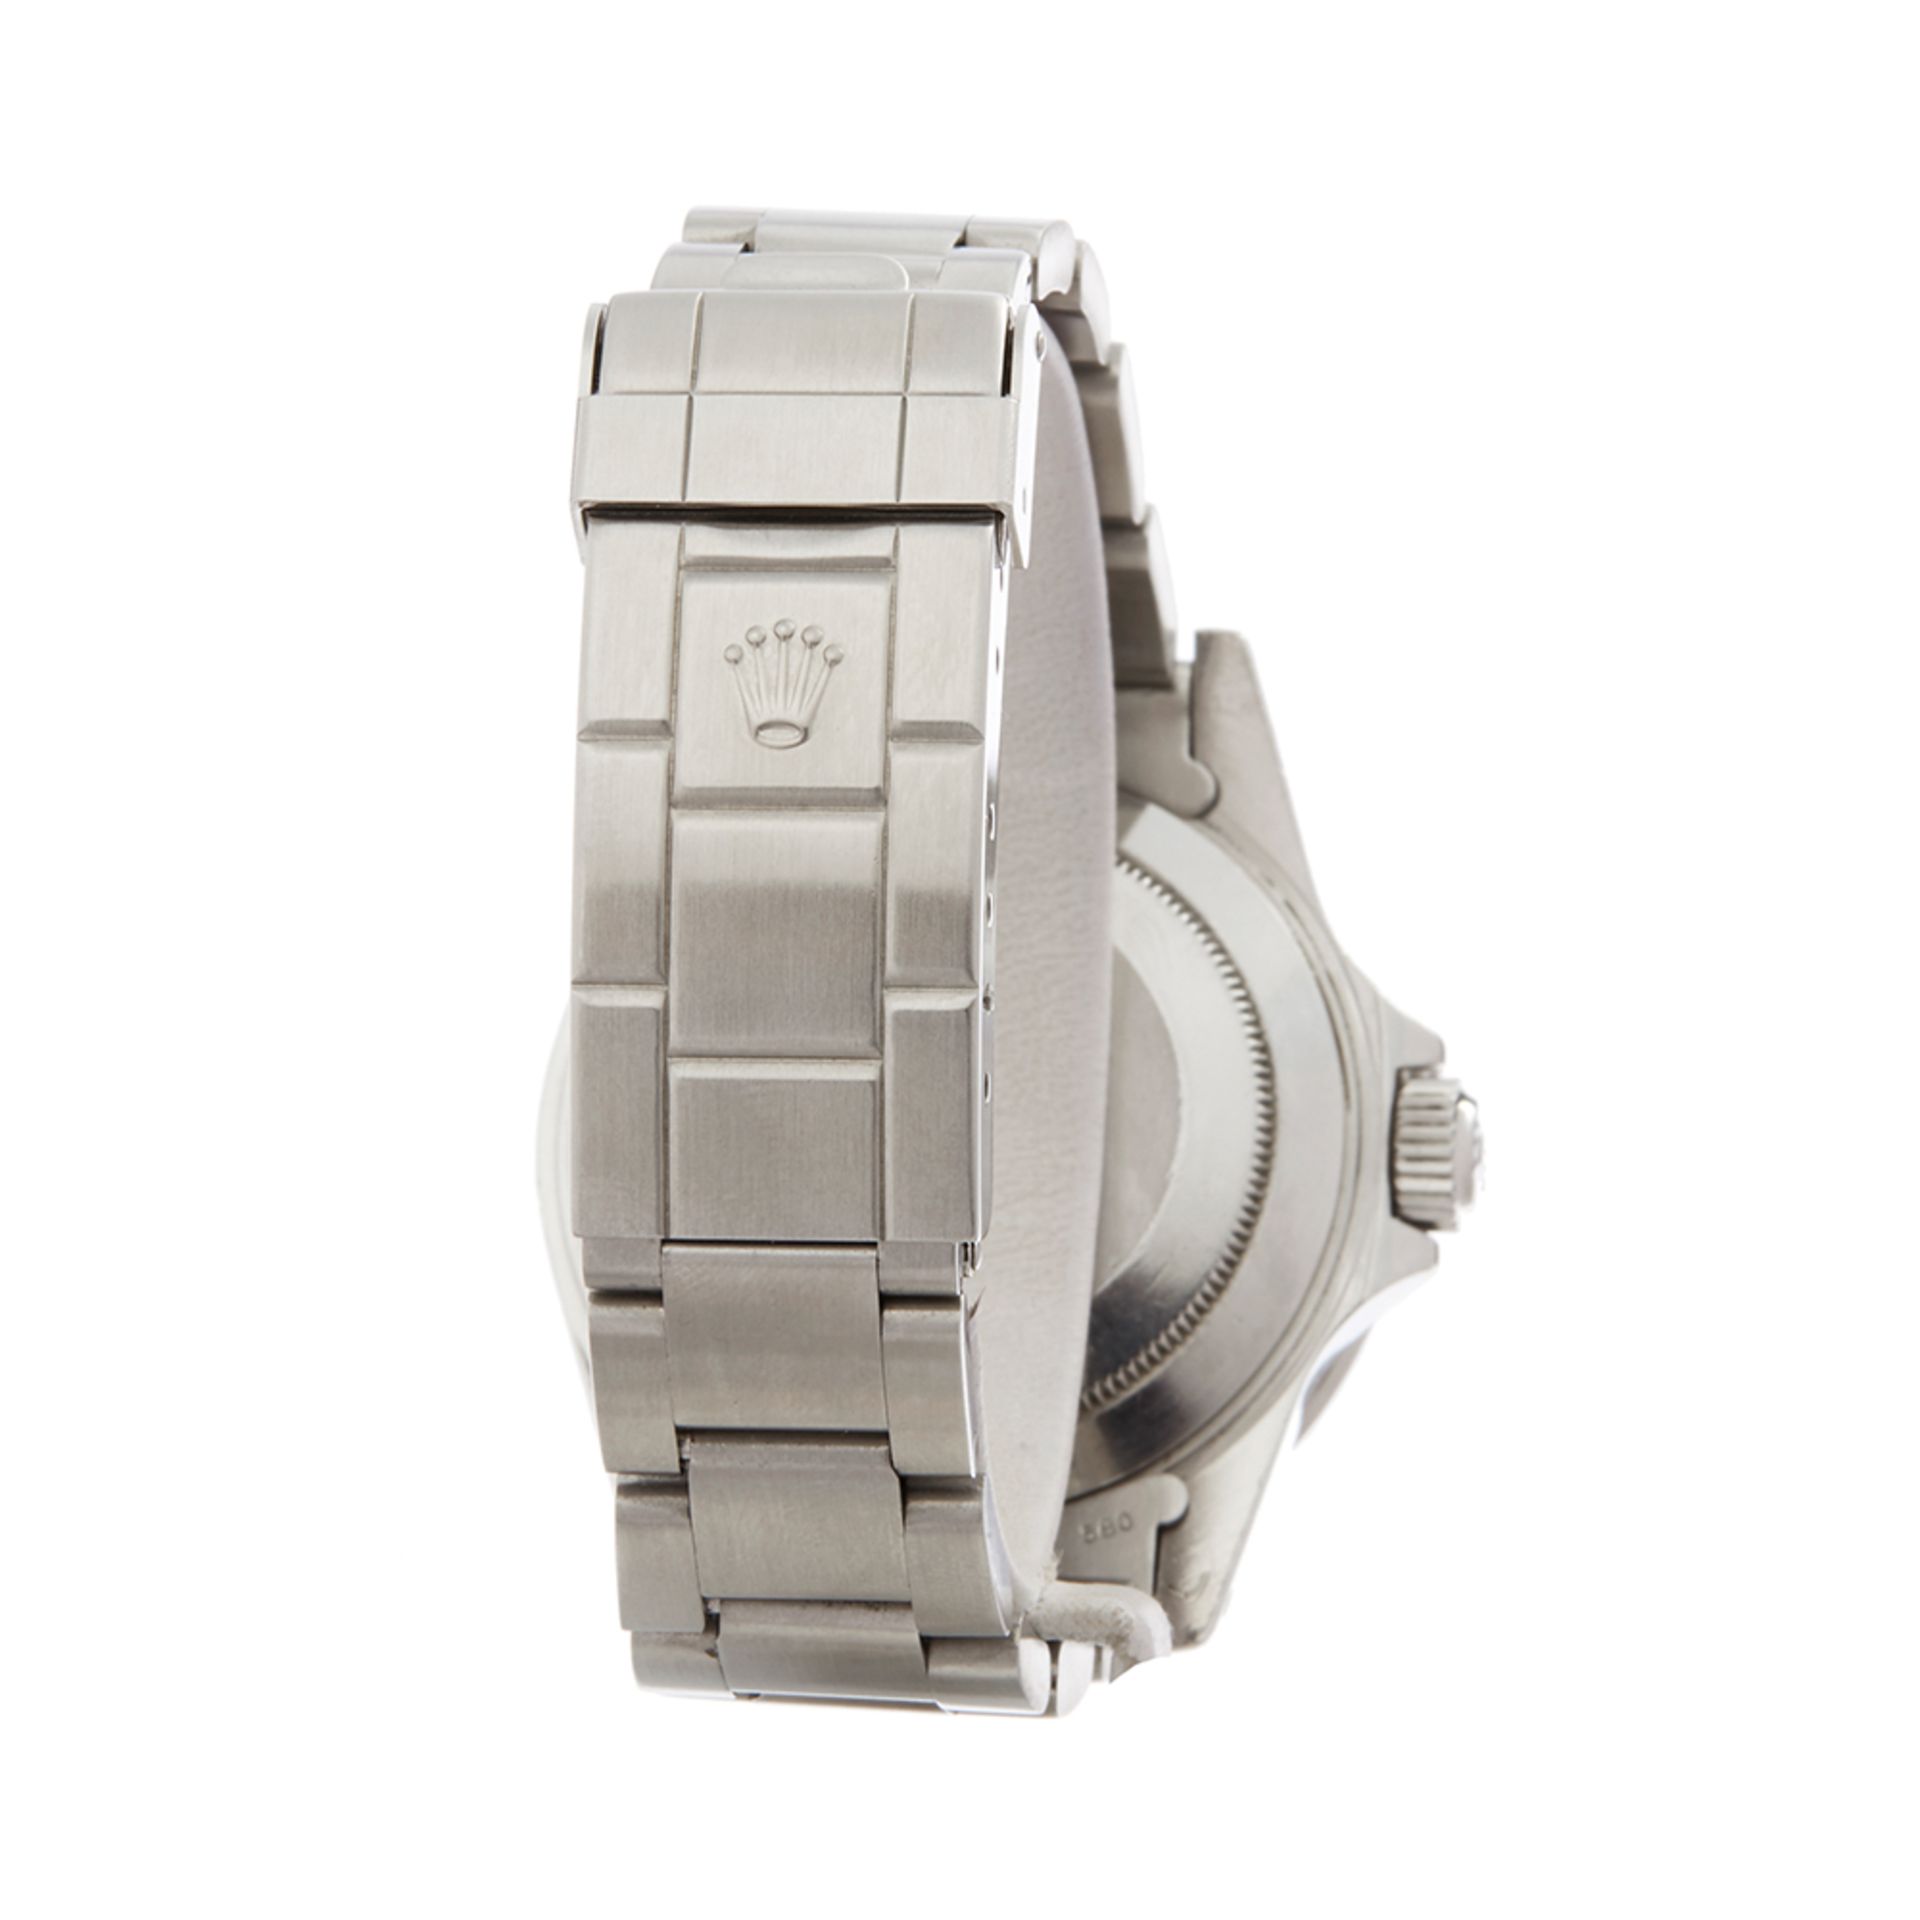 Submariner Stainless Steel - 16800 - Image 6 of 7